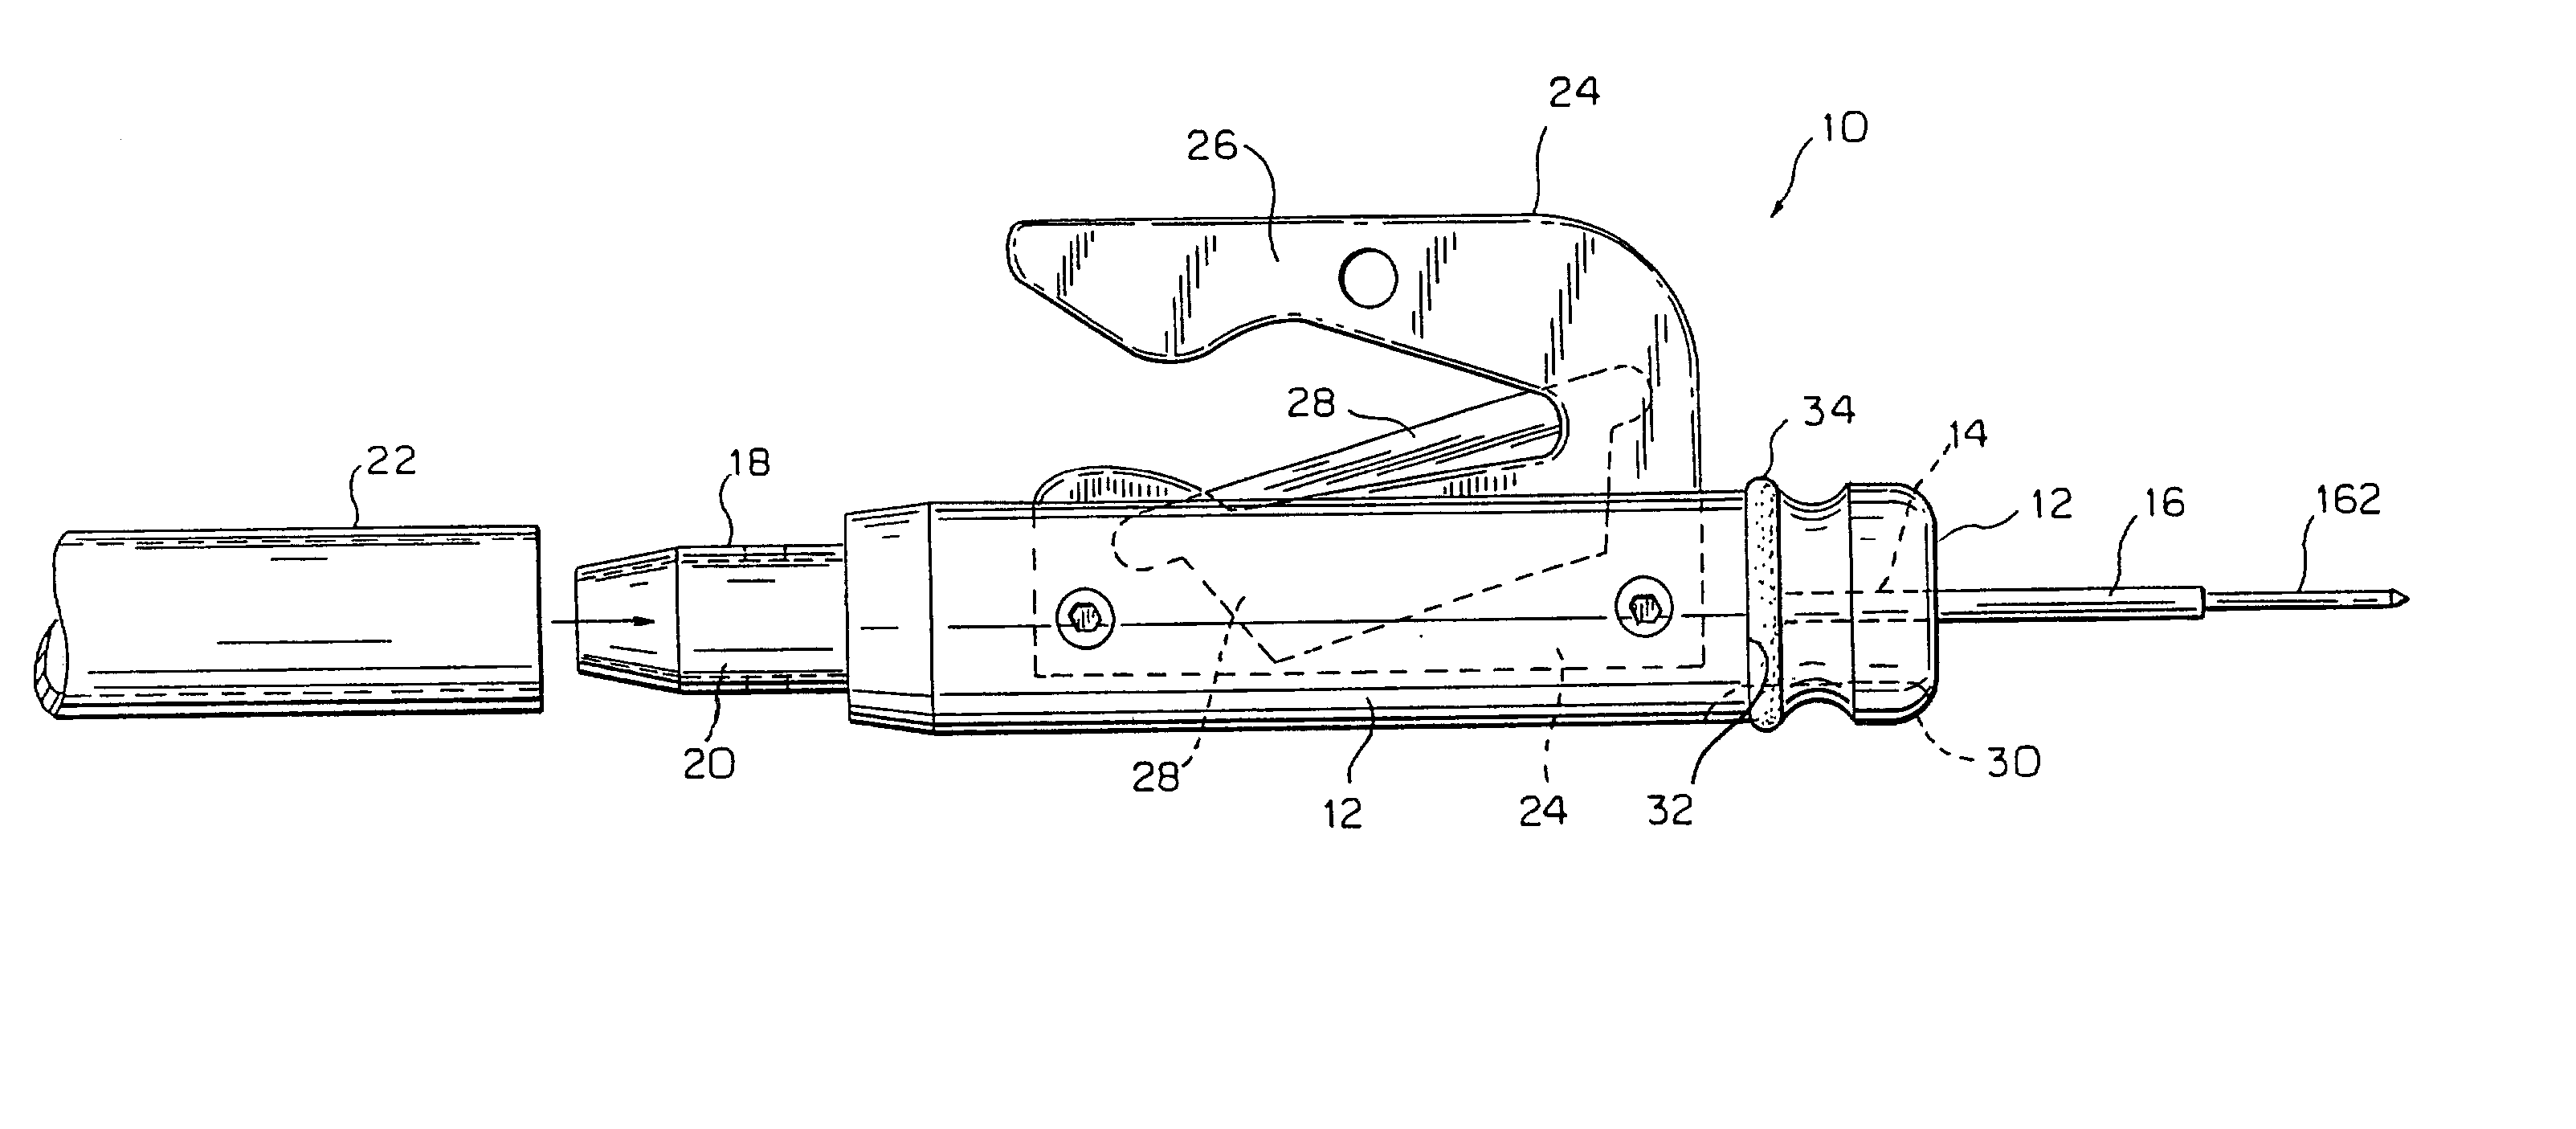 Tag and release device